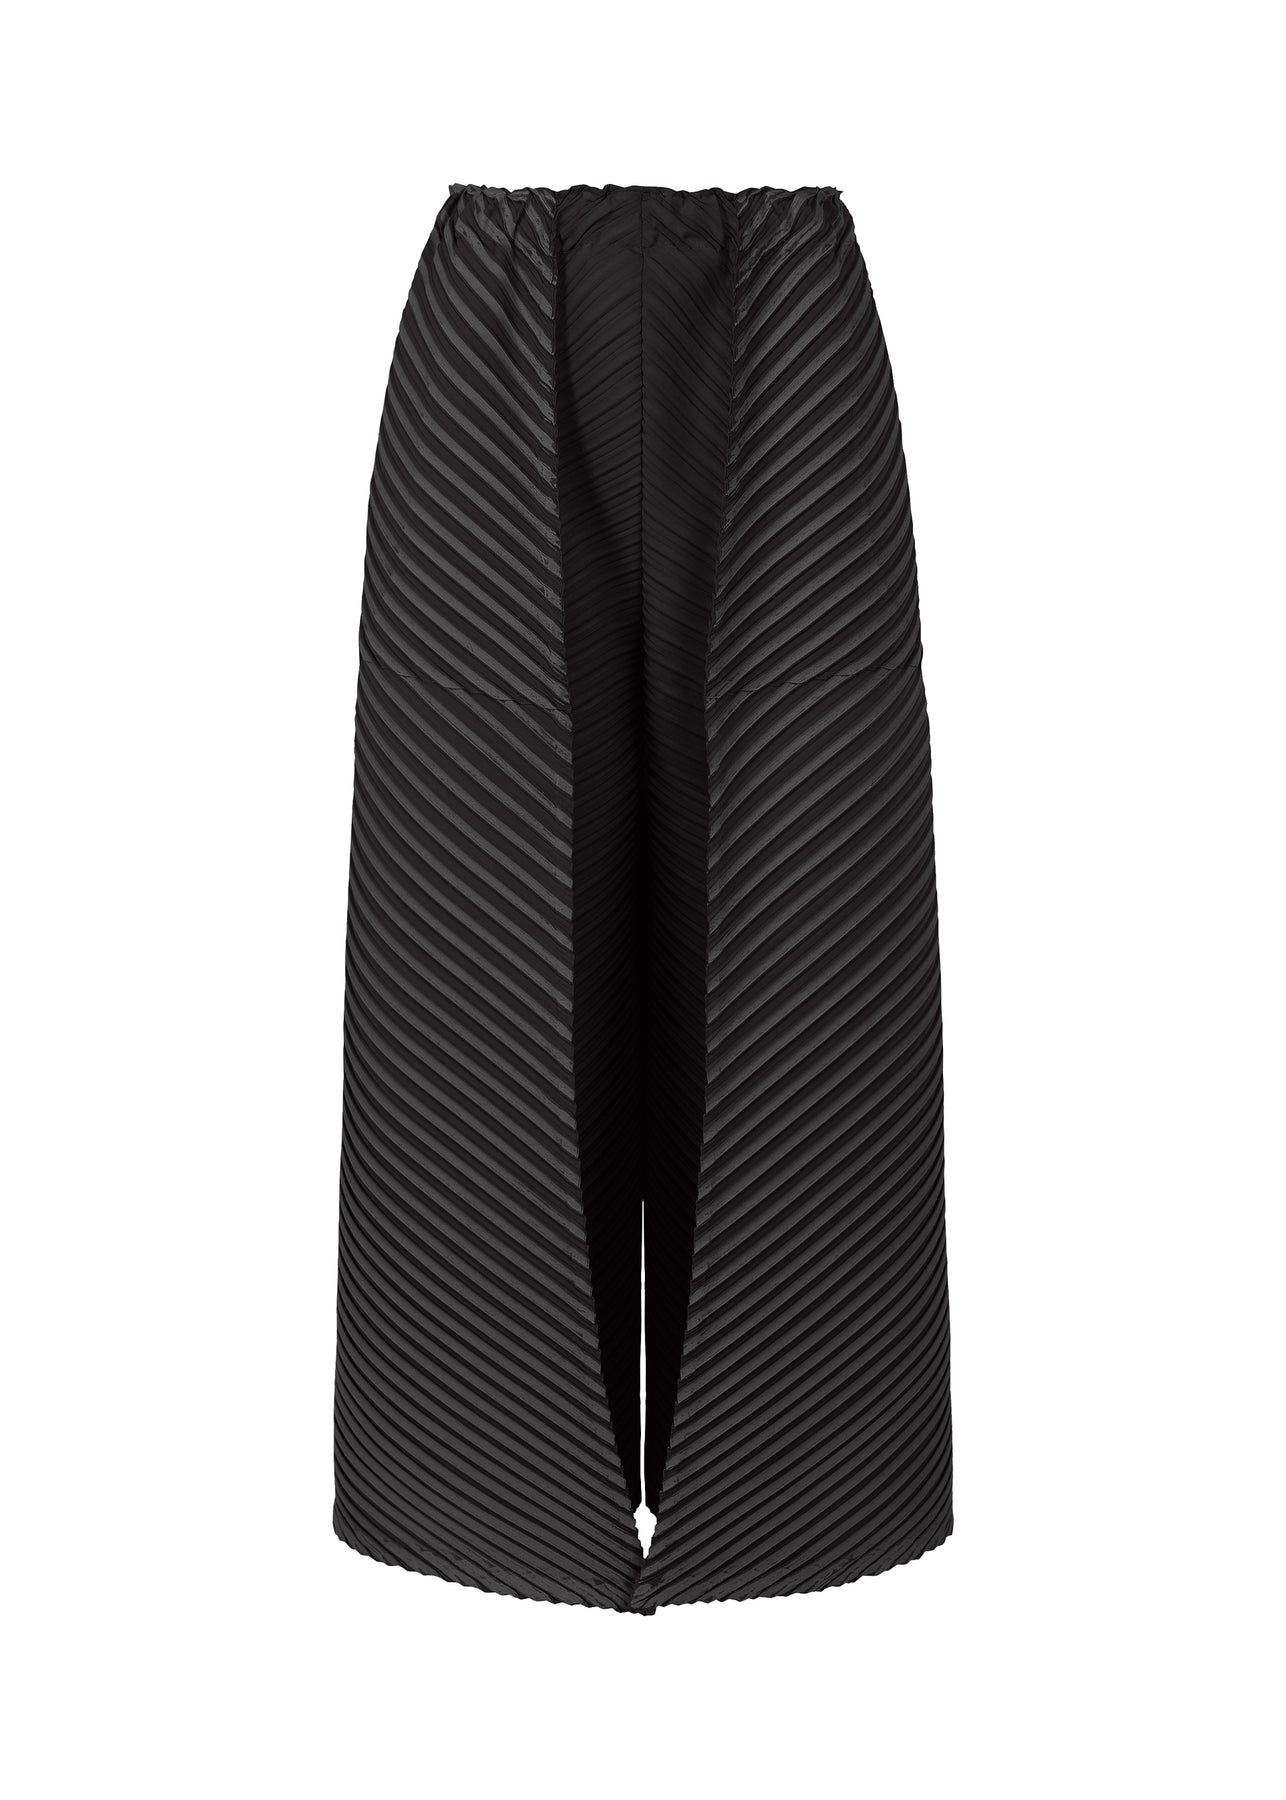 PLASTER PLEATS PANTS | The official ISSEY MIYAKE ONLINE STORE